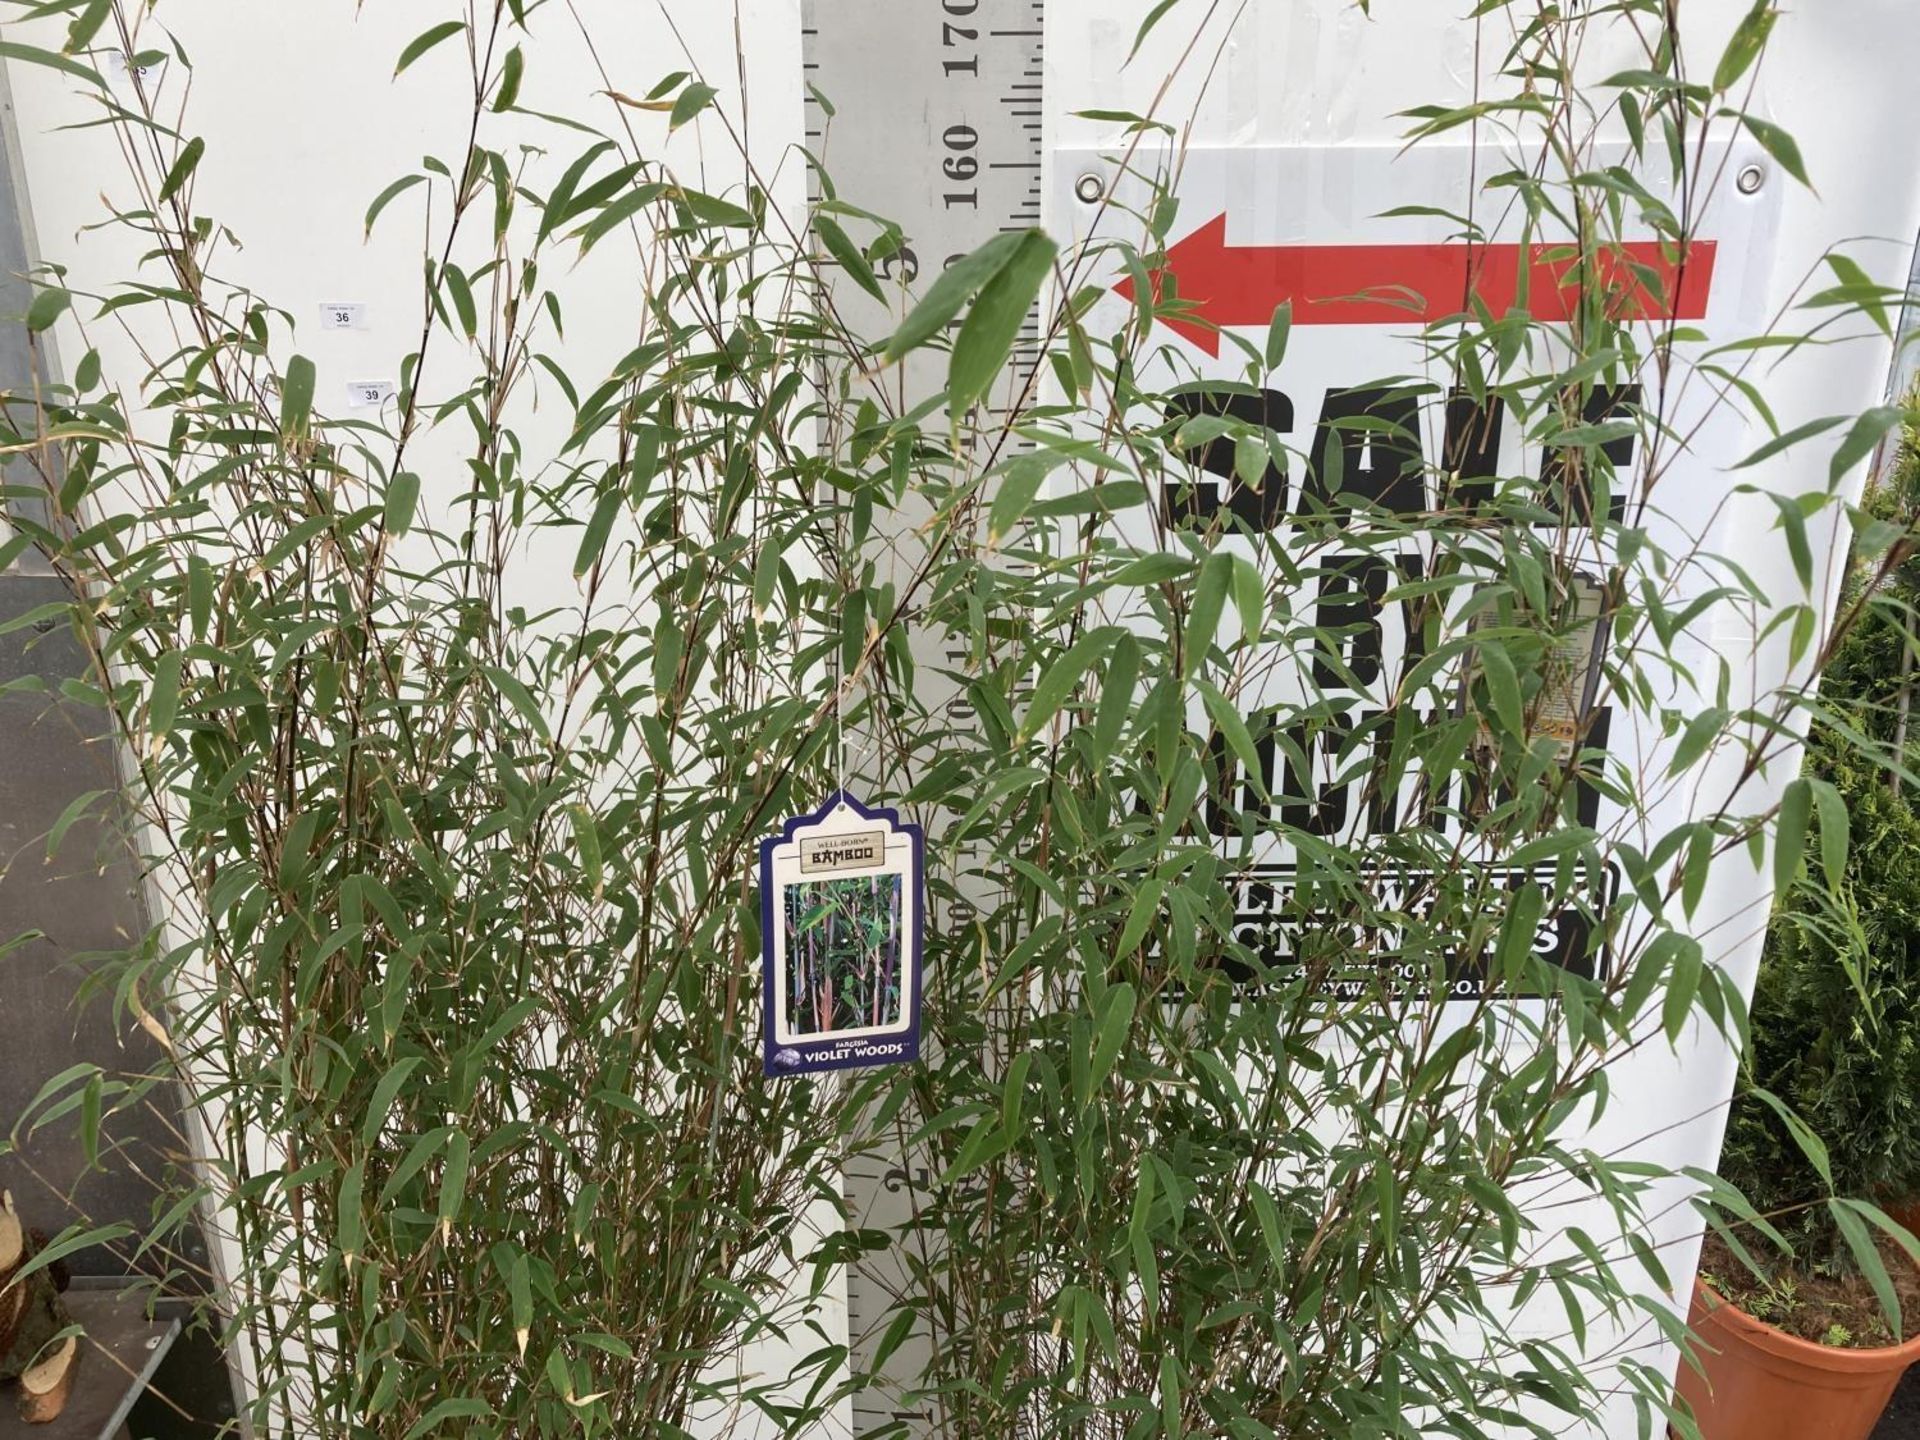 TWO LARGE BAMBOO FARGESIA 'VIOLET WOODS' APPROX 180CM IN HEIGHT IN 10 LTR POTS PLUS VAT TO BE SOLD - Image 3 of 6